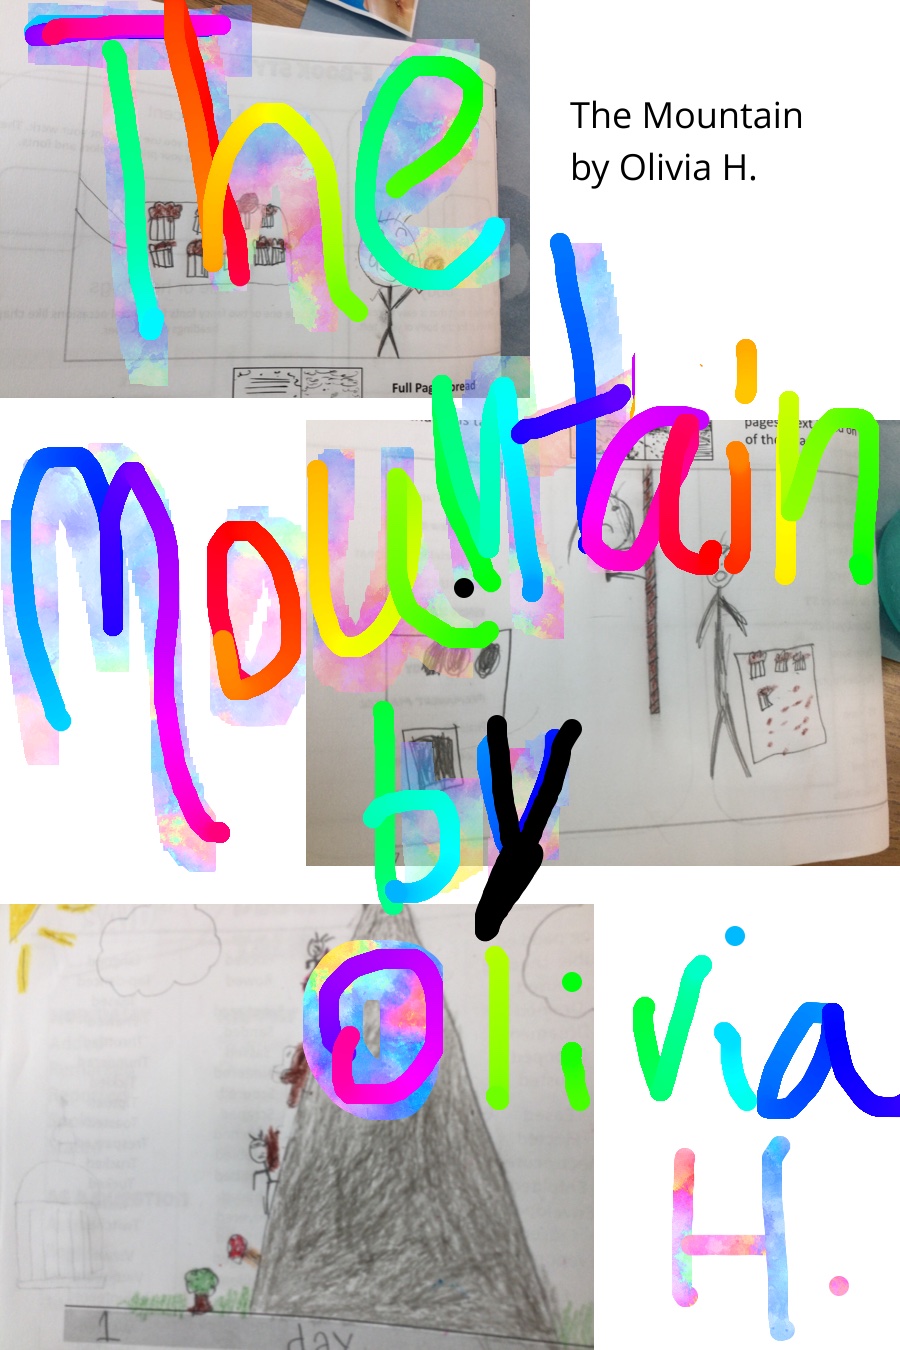 The Mountain by Olivia H (1)